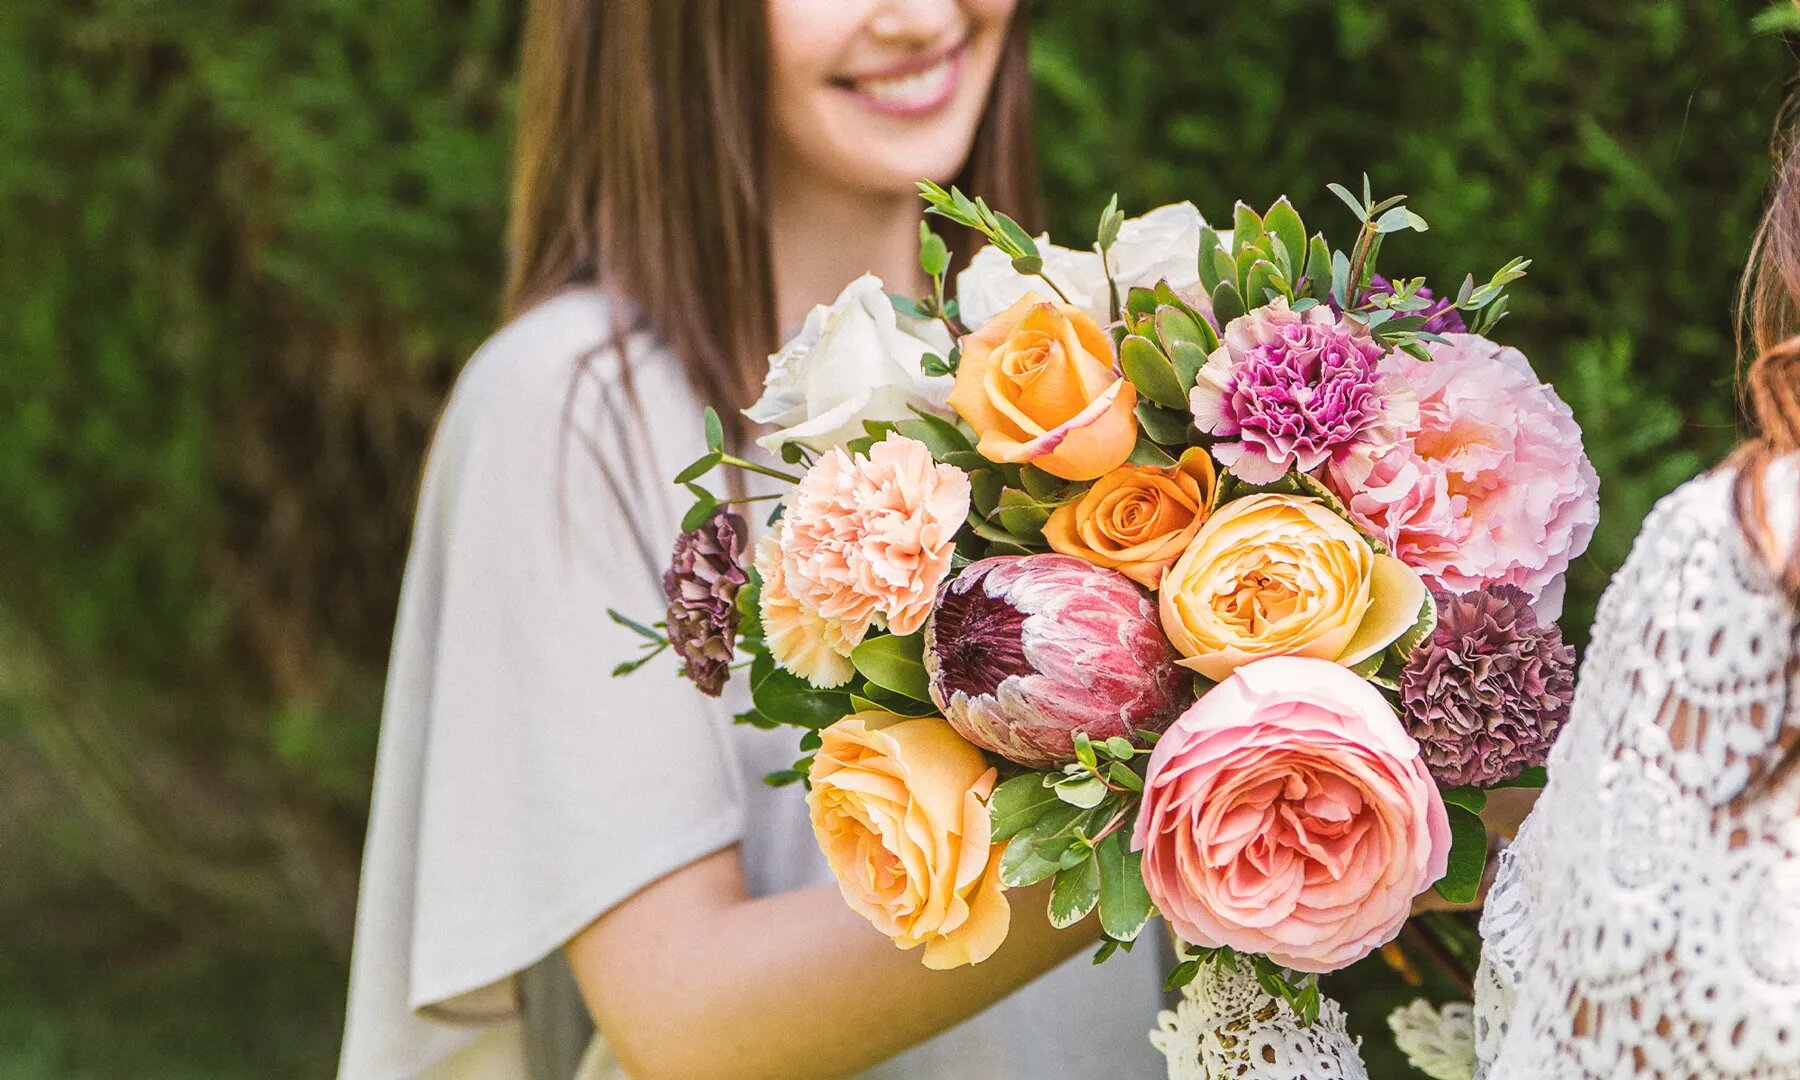 Satisfy your Family and love with Freshly Arranged Flowers Online